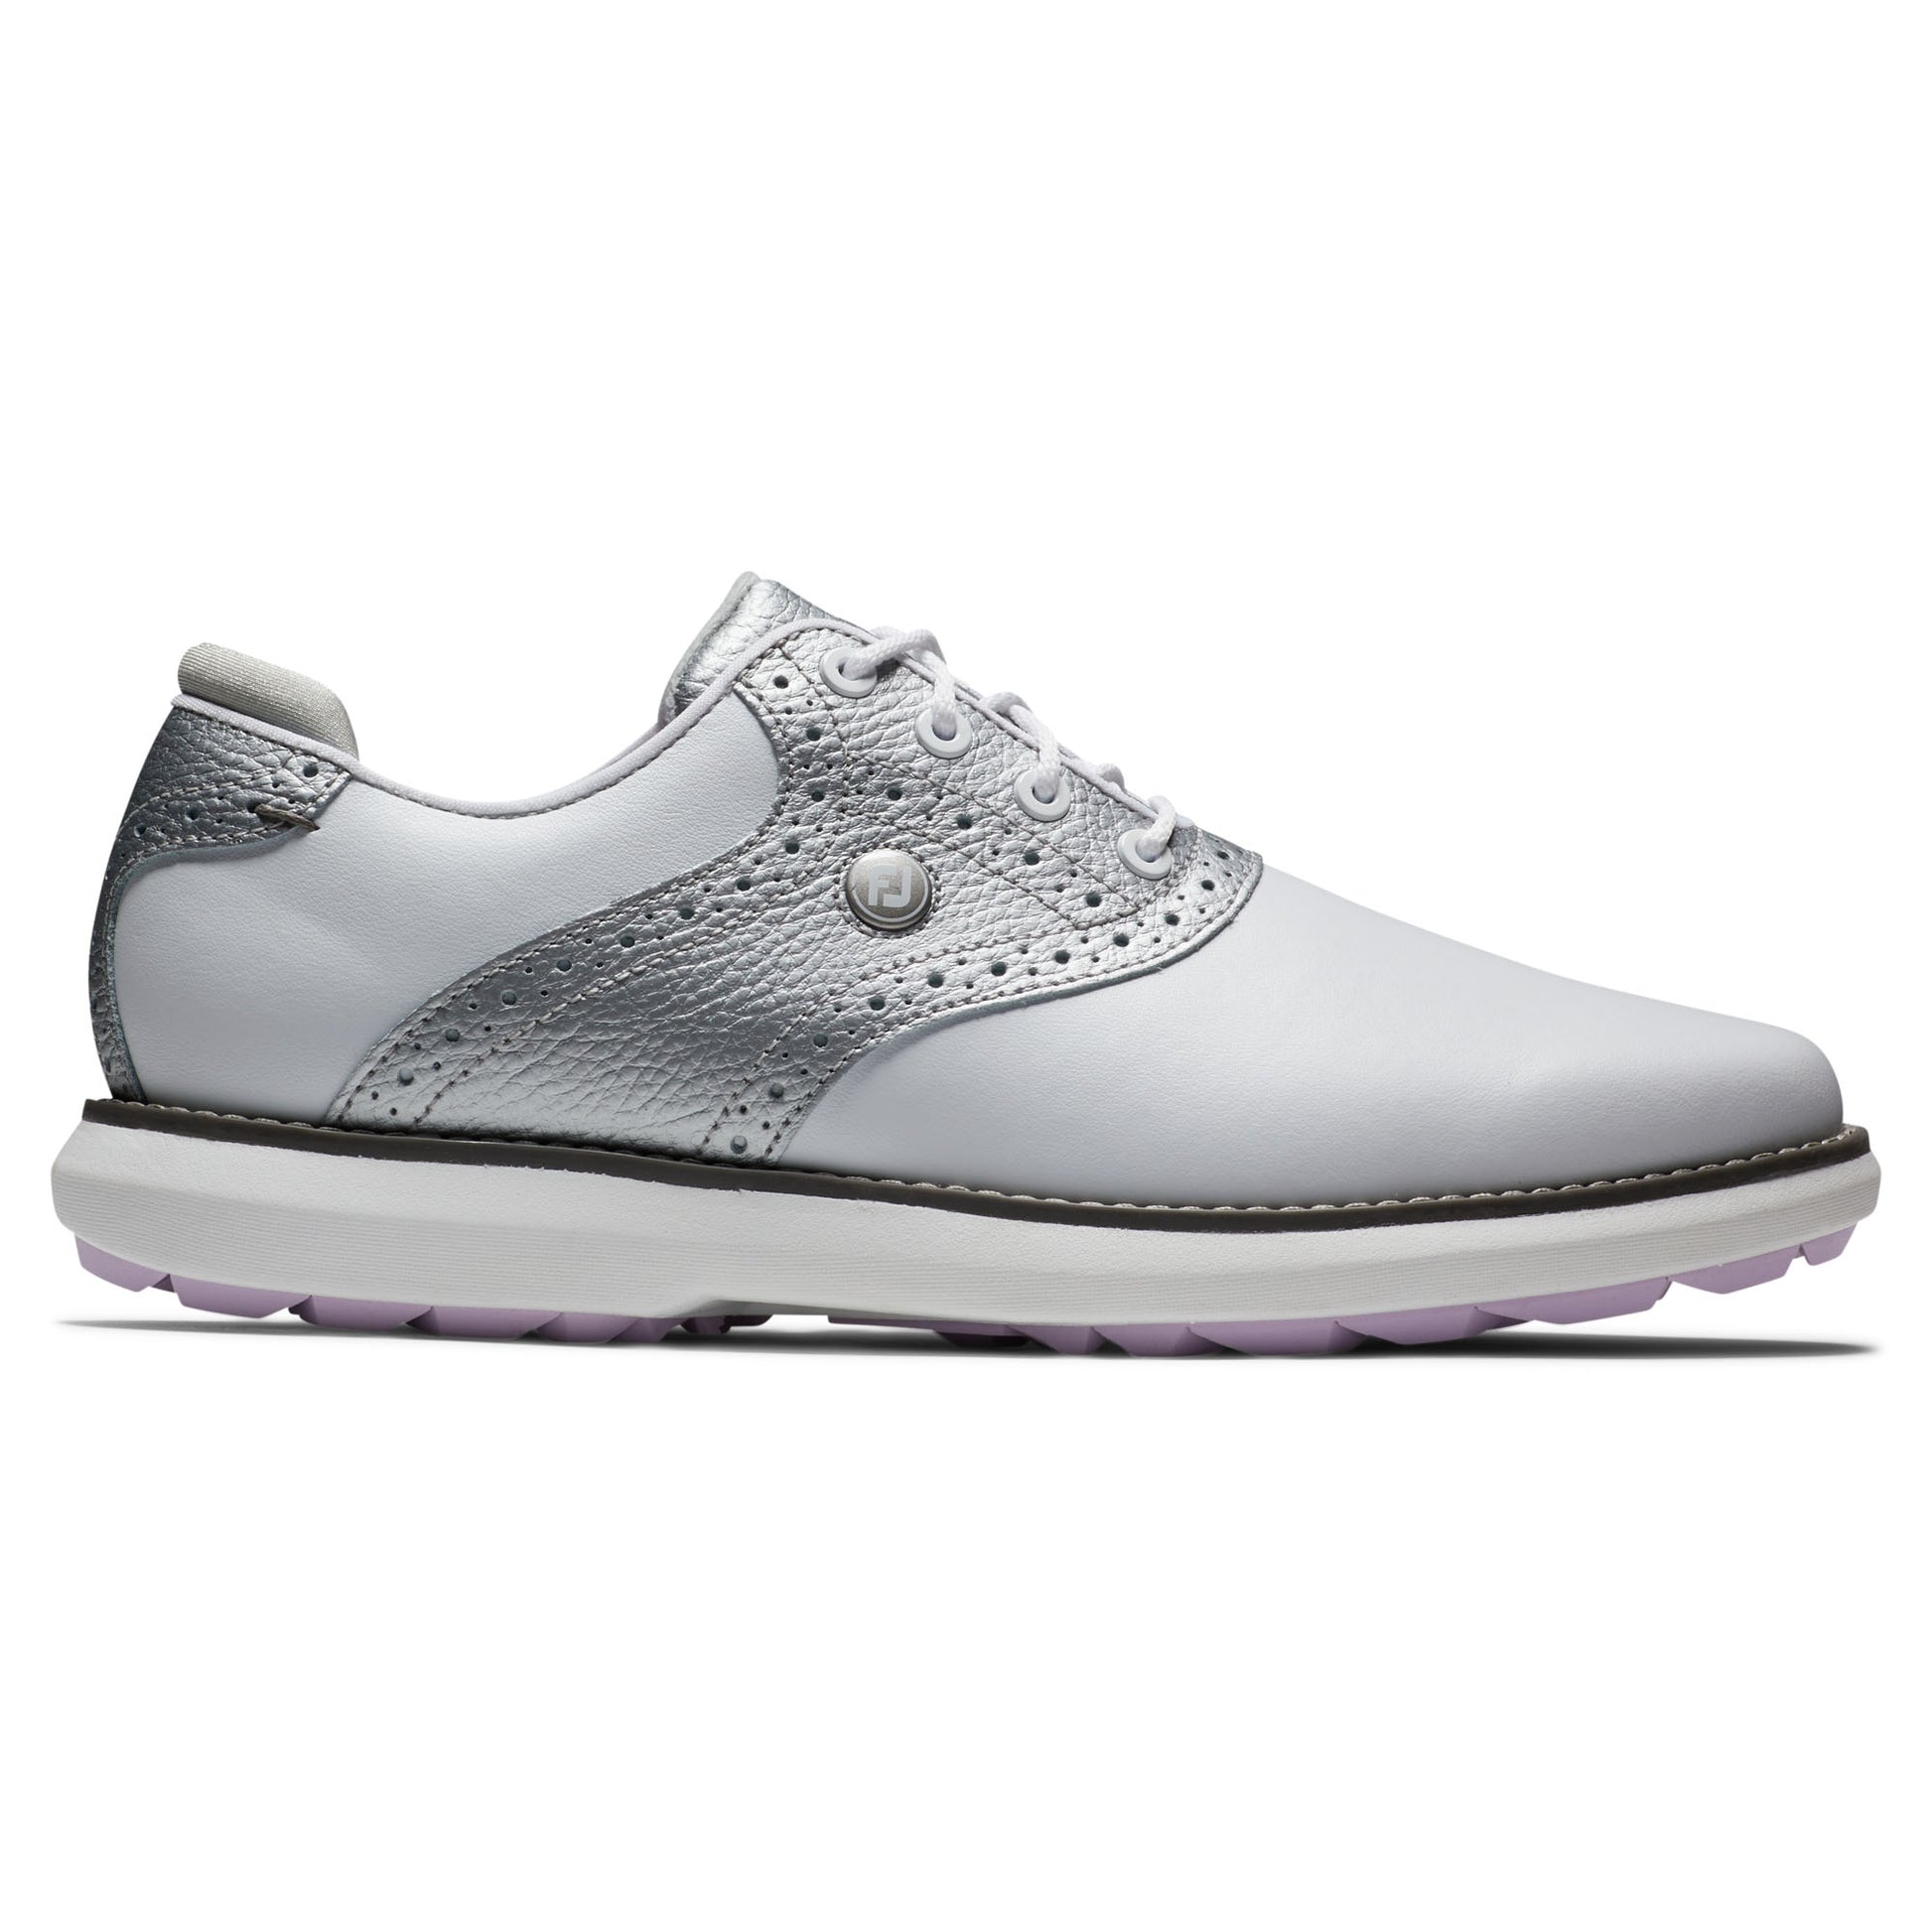 FootJoy Ladies Traditions Shoes in White, Silver & Purple